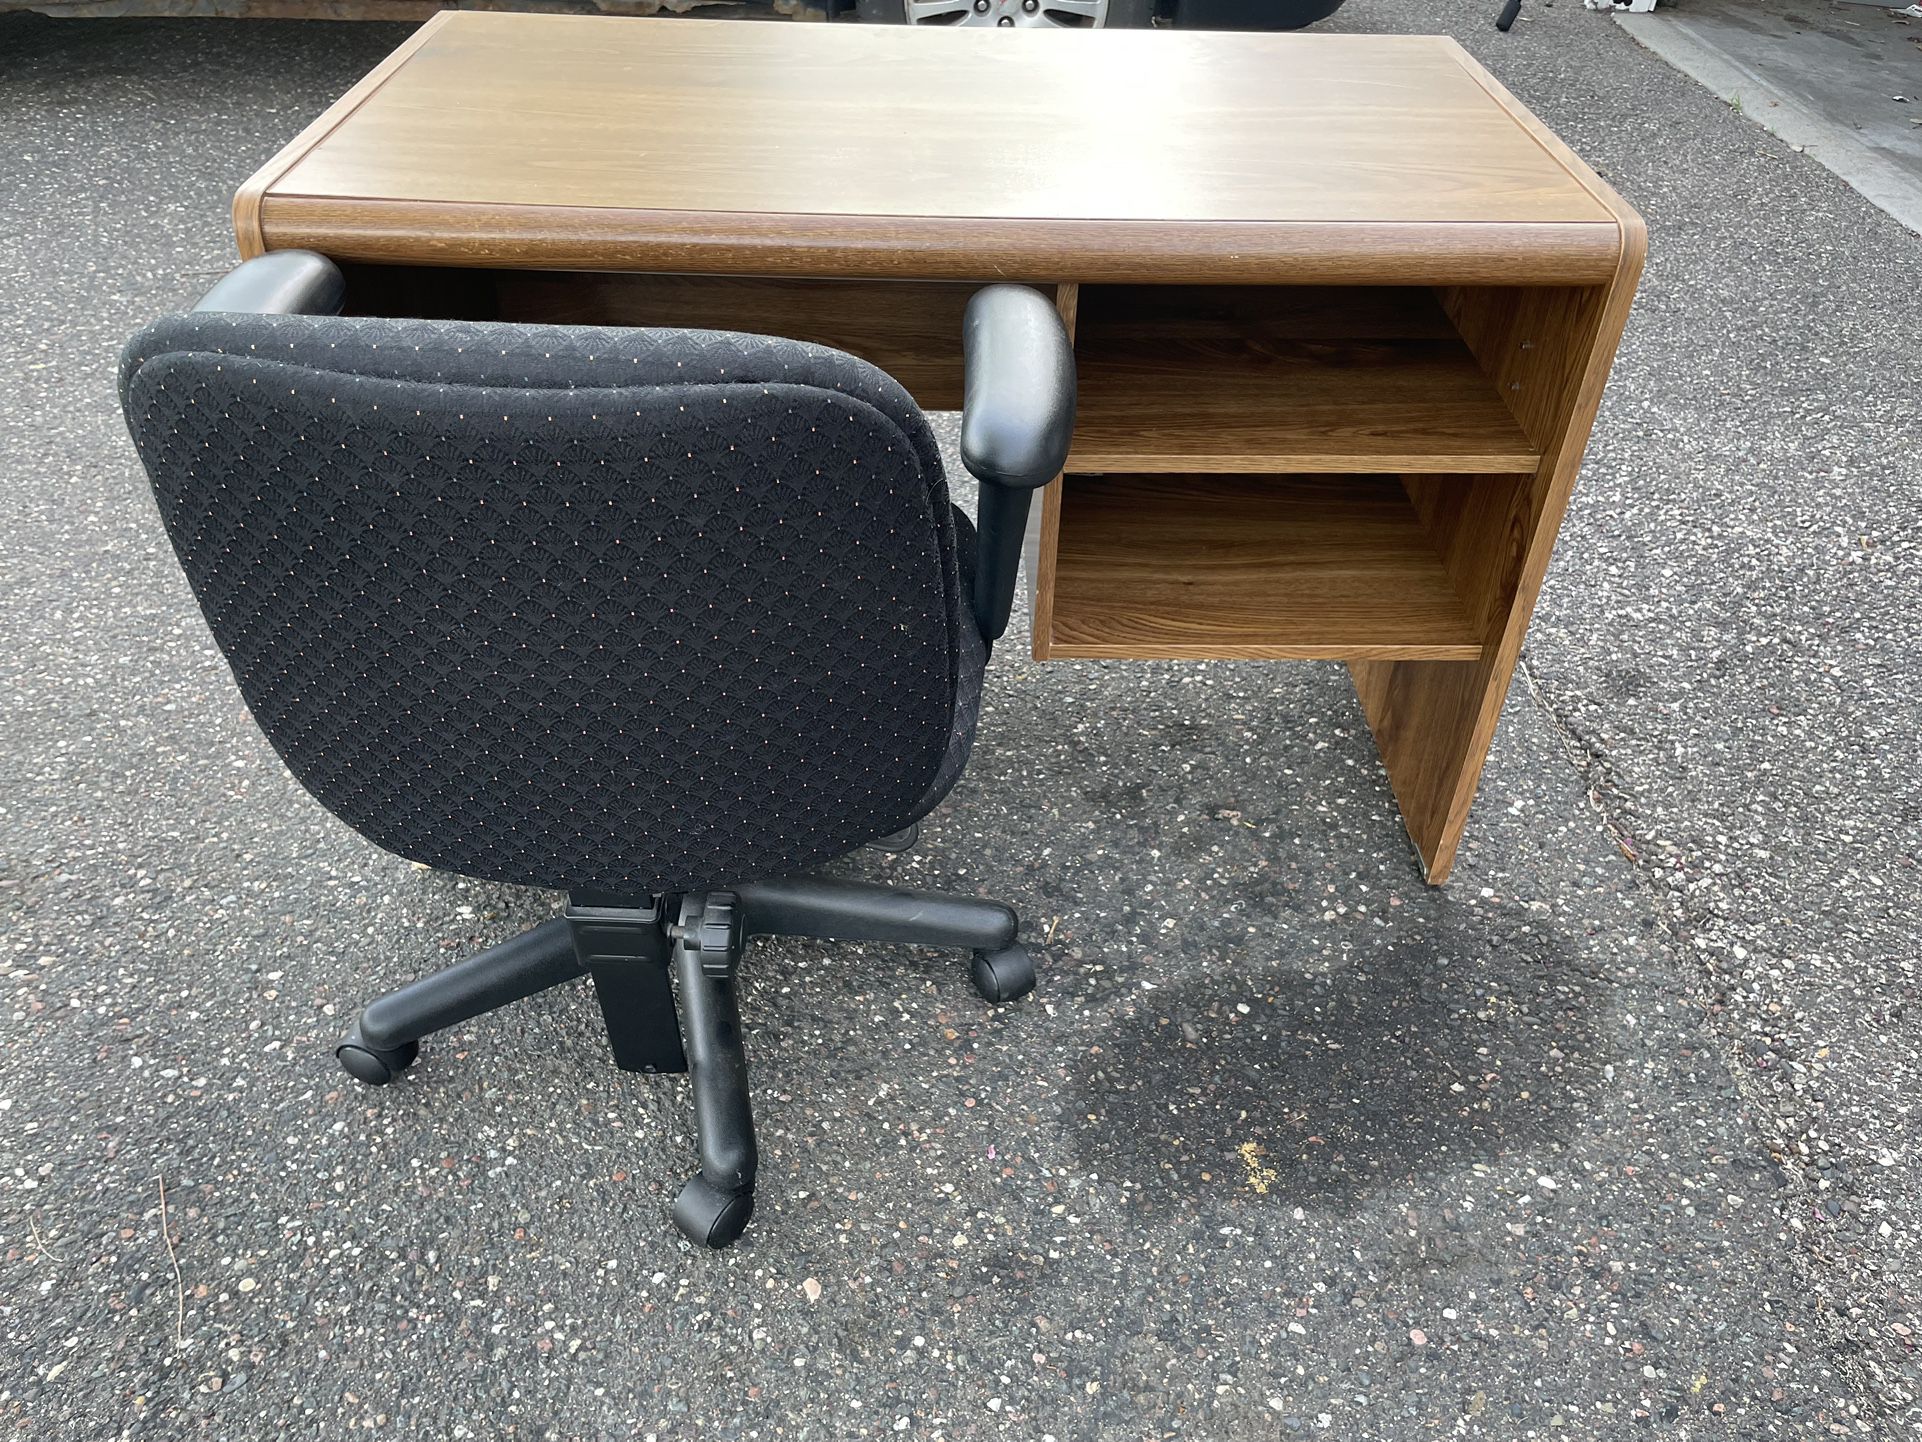 Wooden Desk And Adjustable Chair